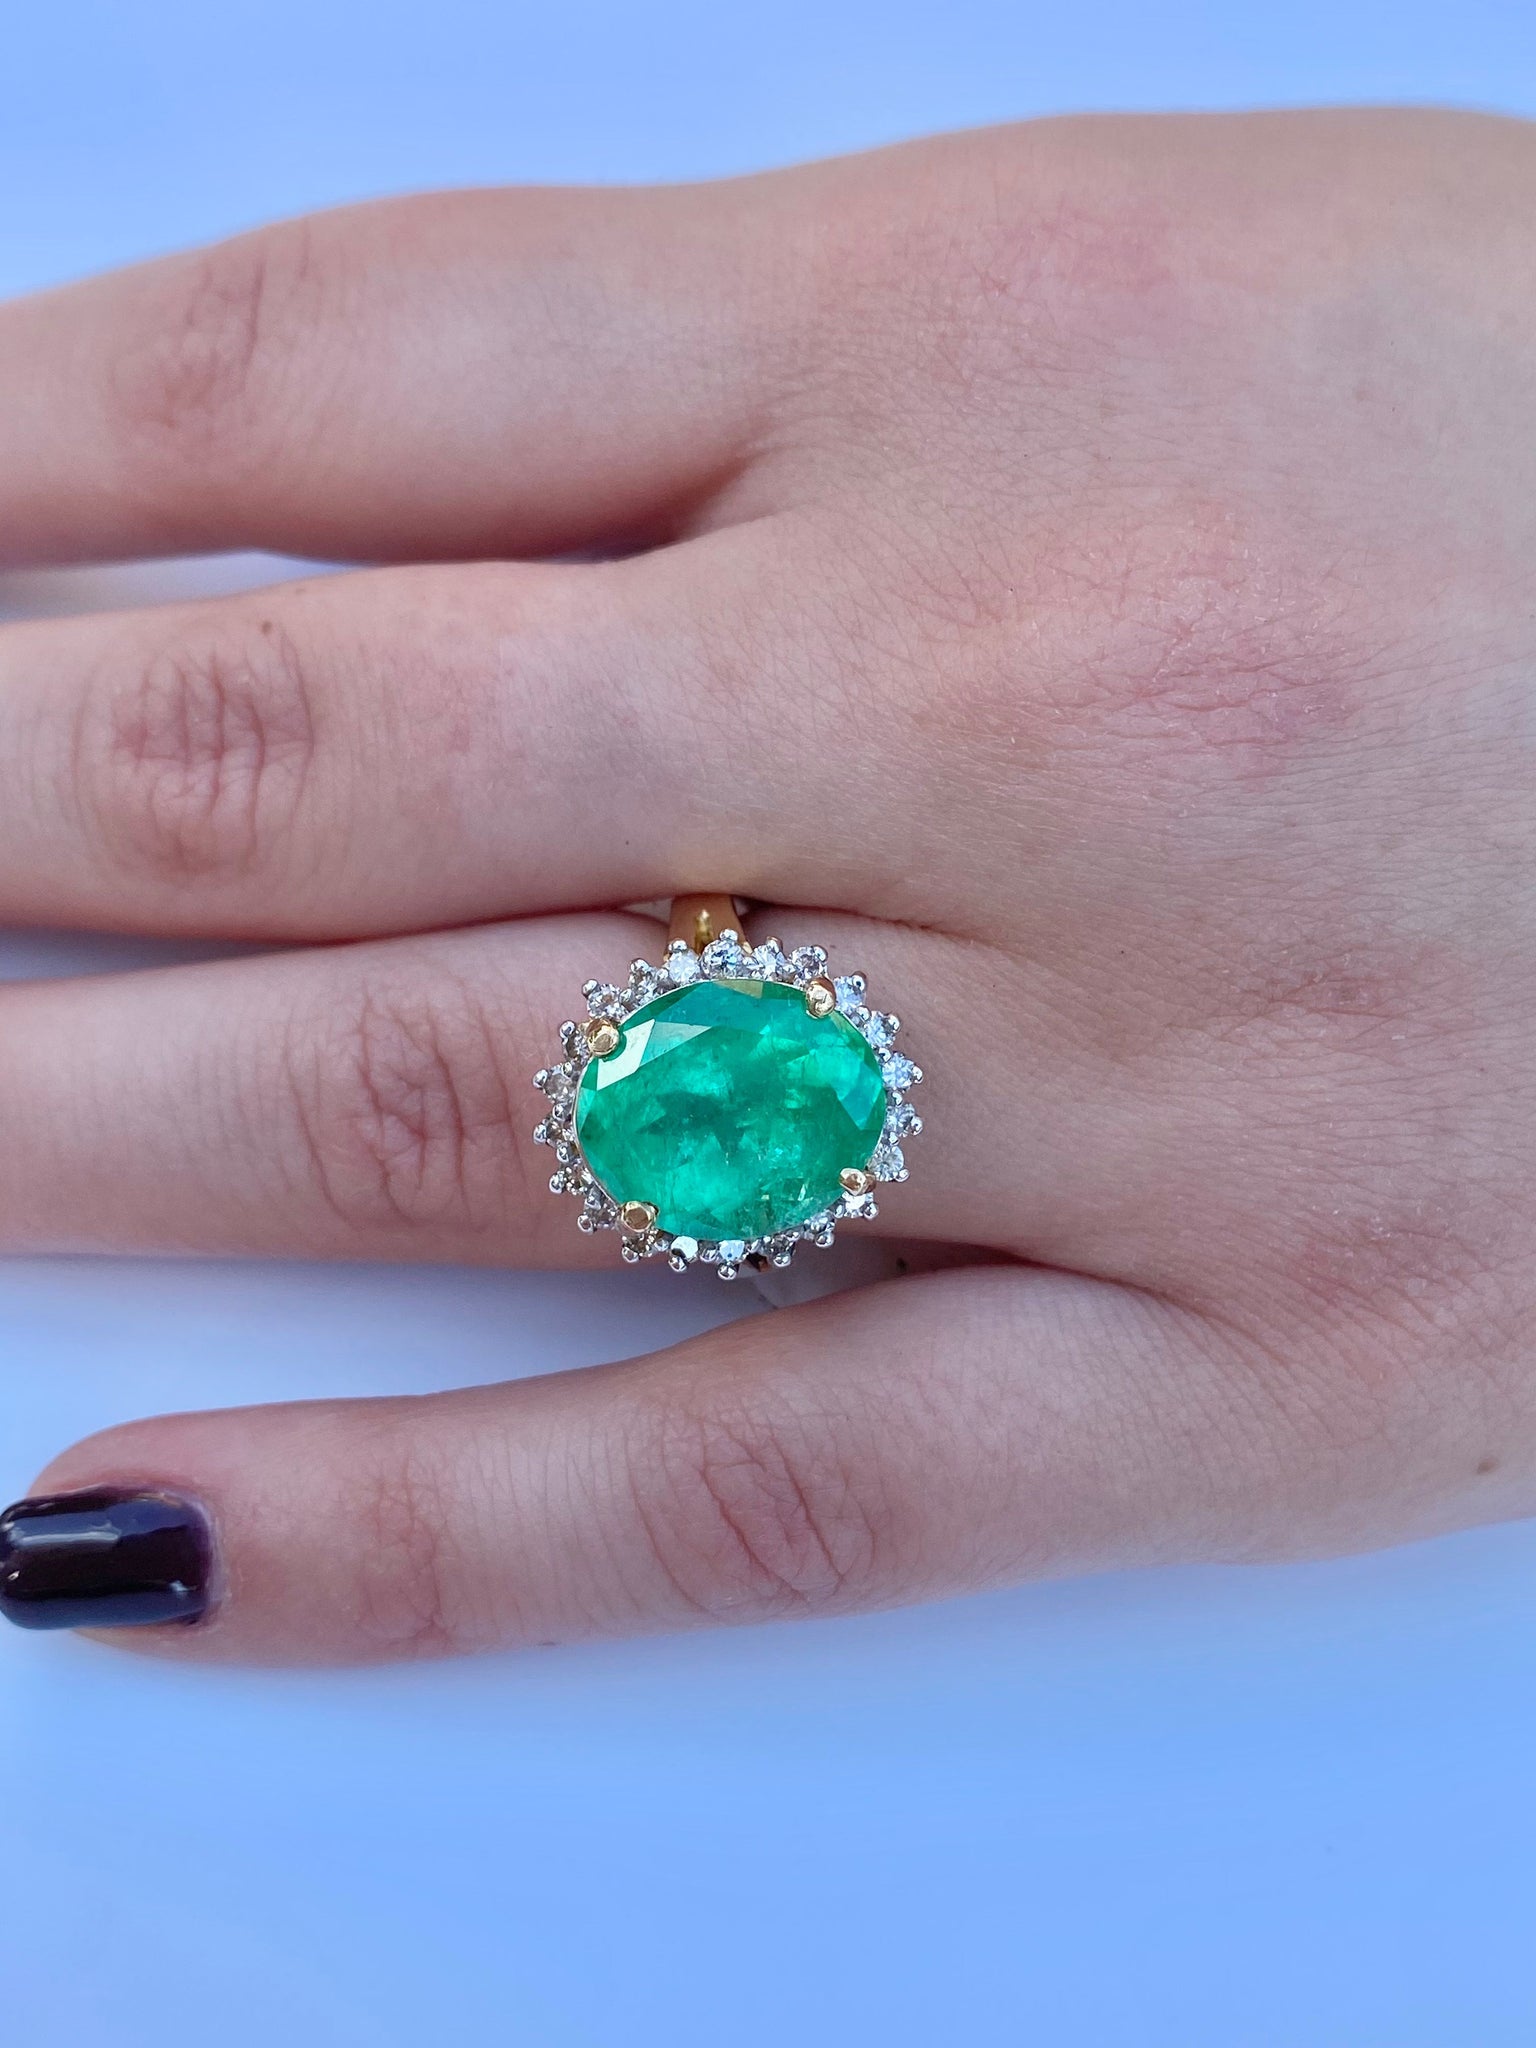 Vintage 6.88 carat Colombian Emerald in 14k yellow gold ring - ASSAY